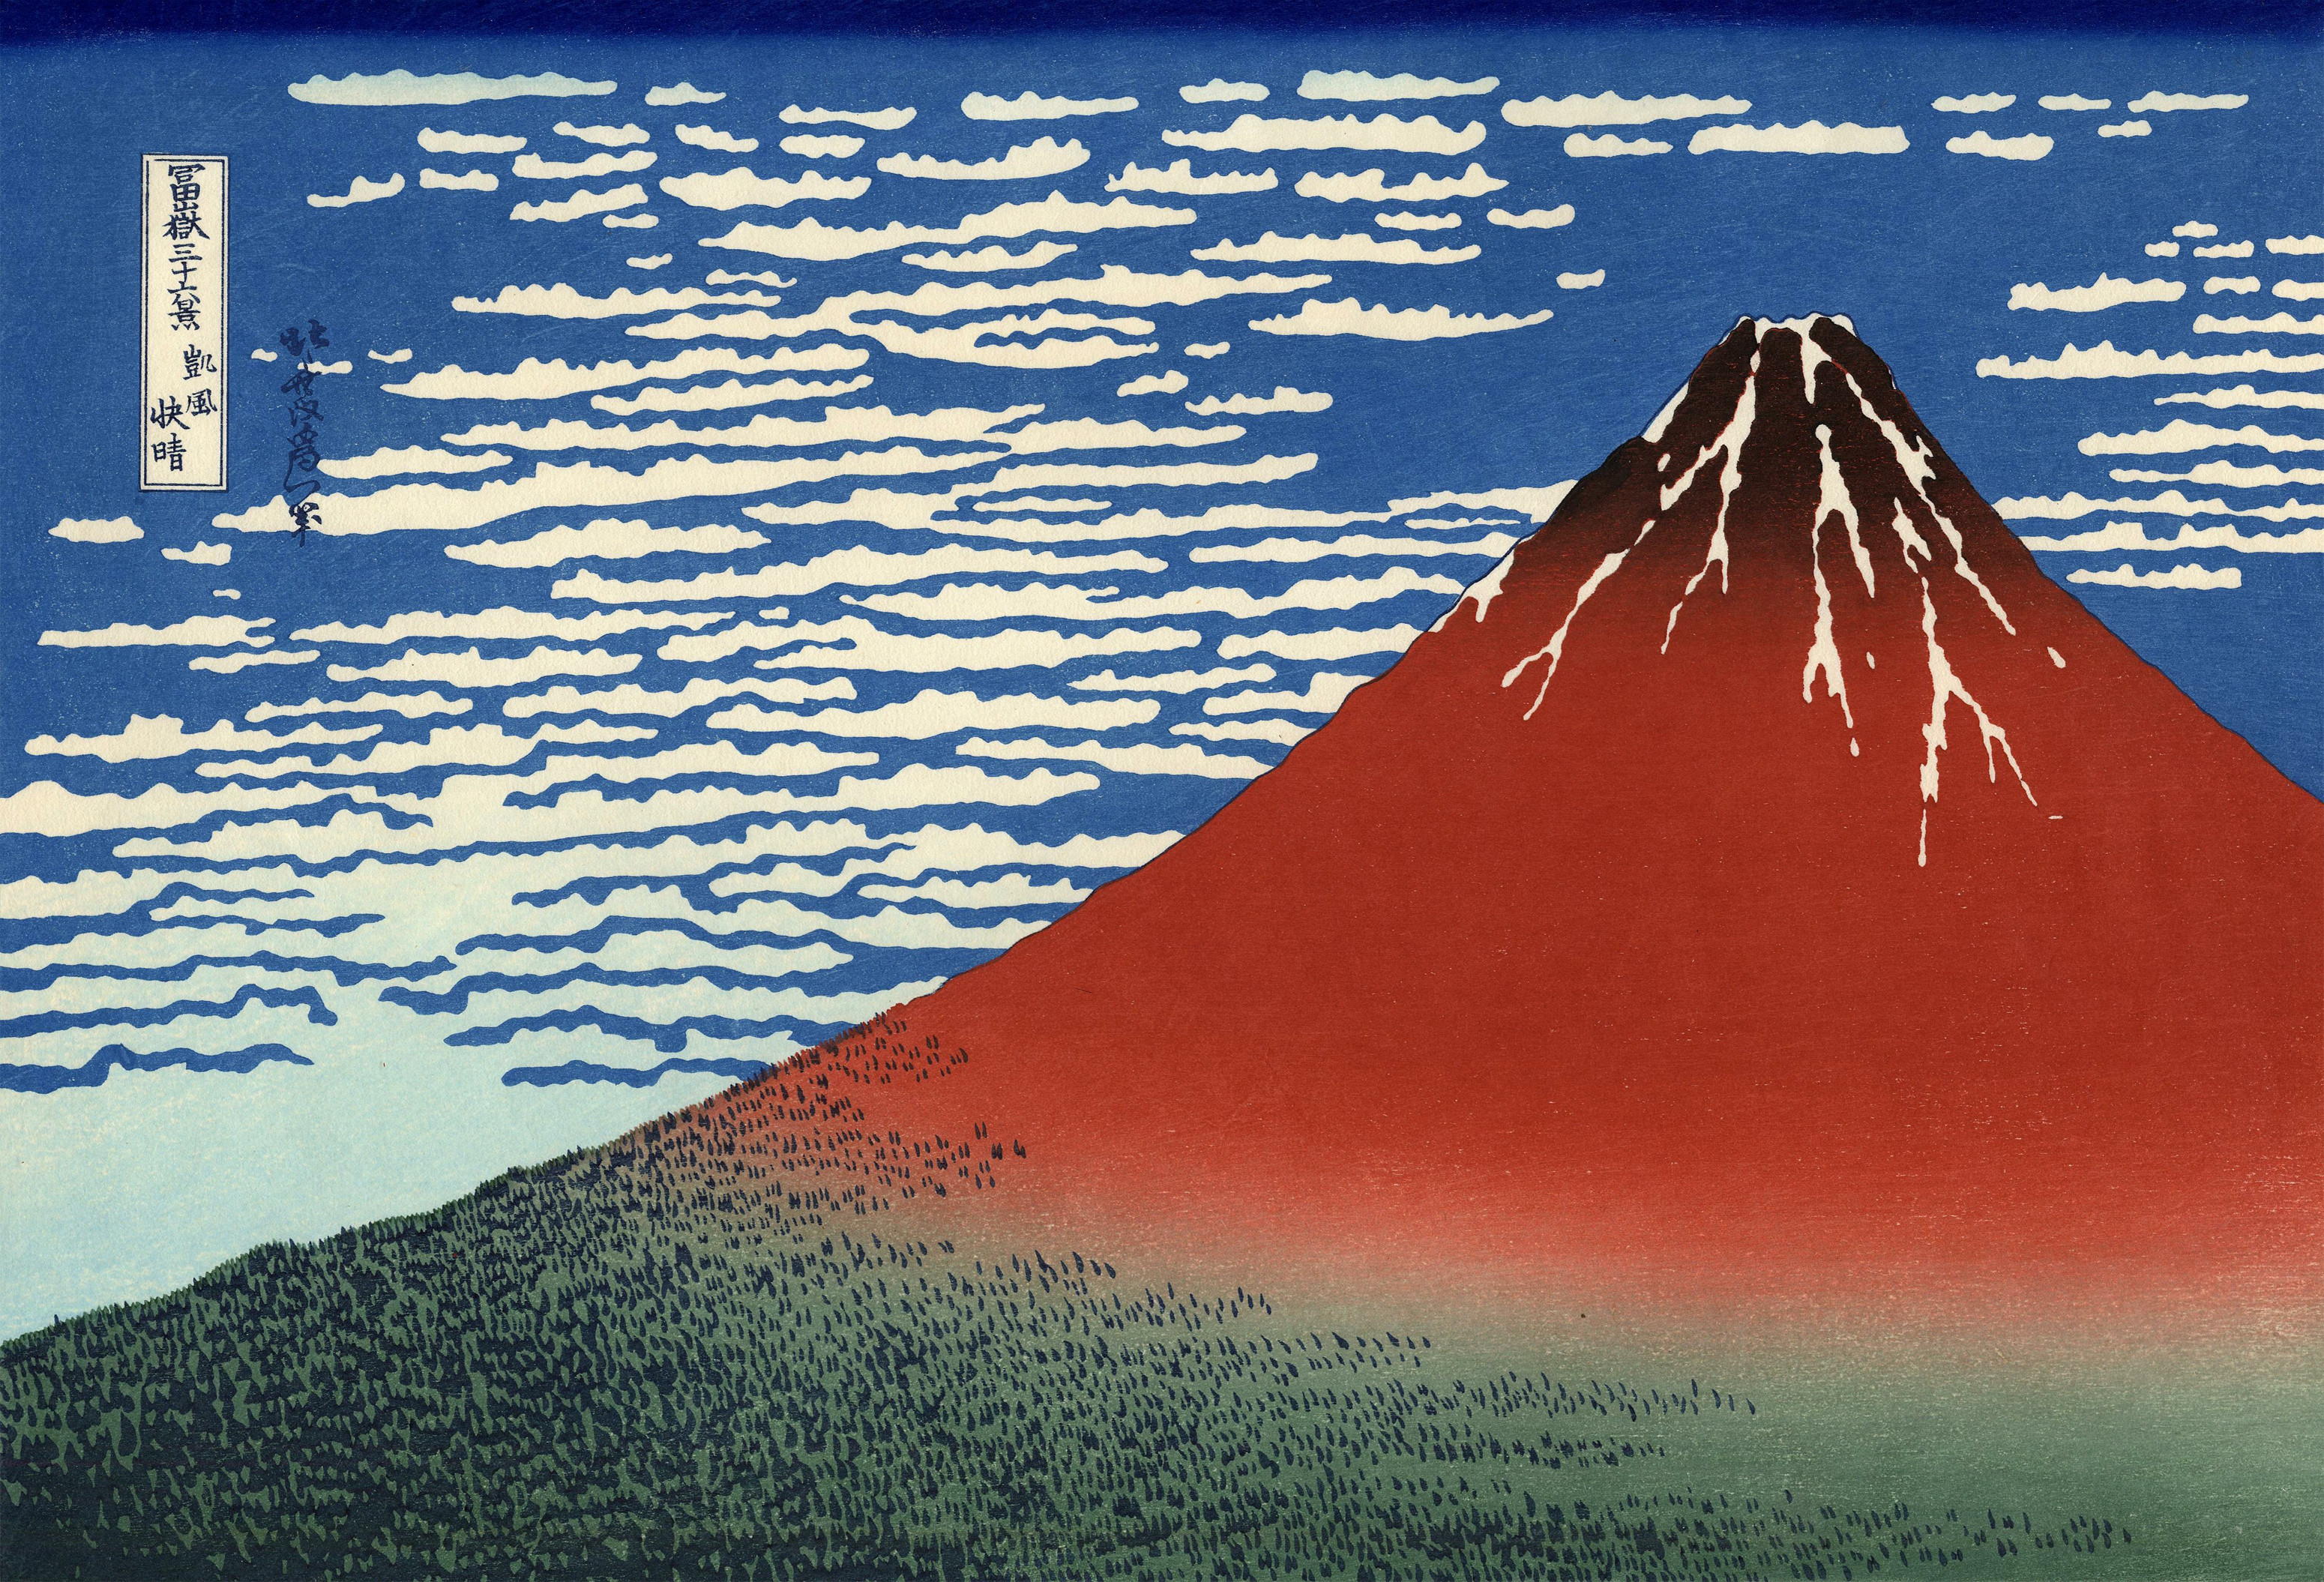 Katsushika Hokusai. South Wind, Clear Sky, also known as Red Fuji, from the series Thirty-six Views of Mount Fuji